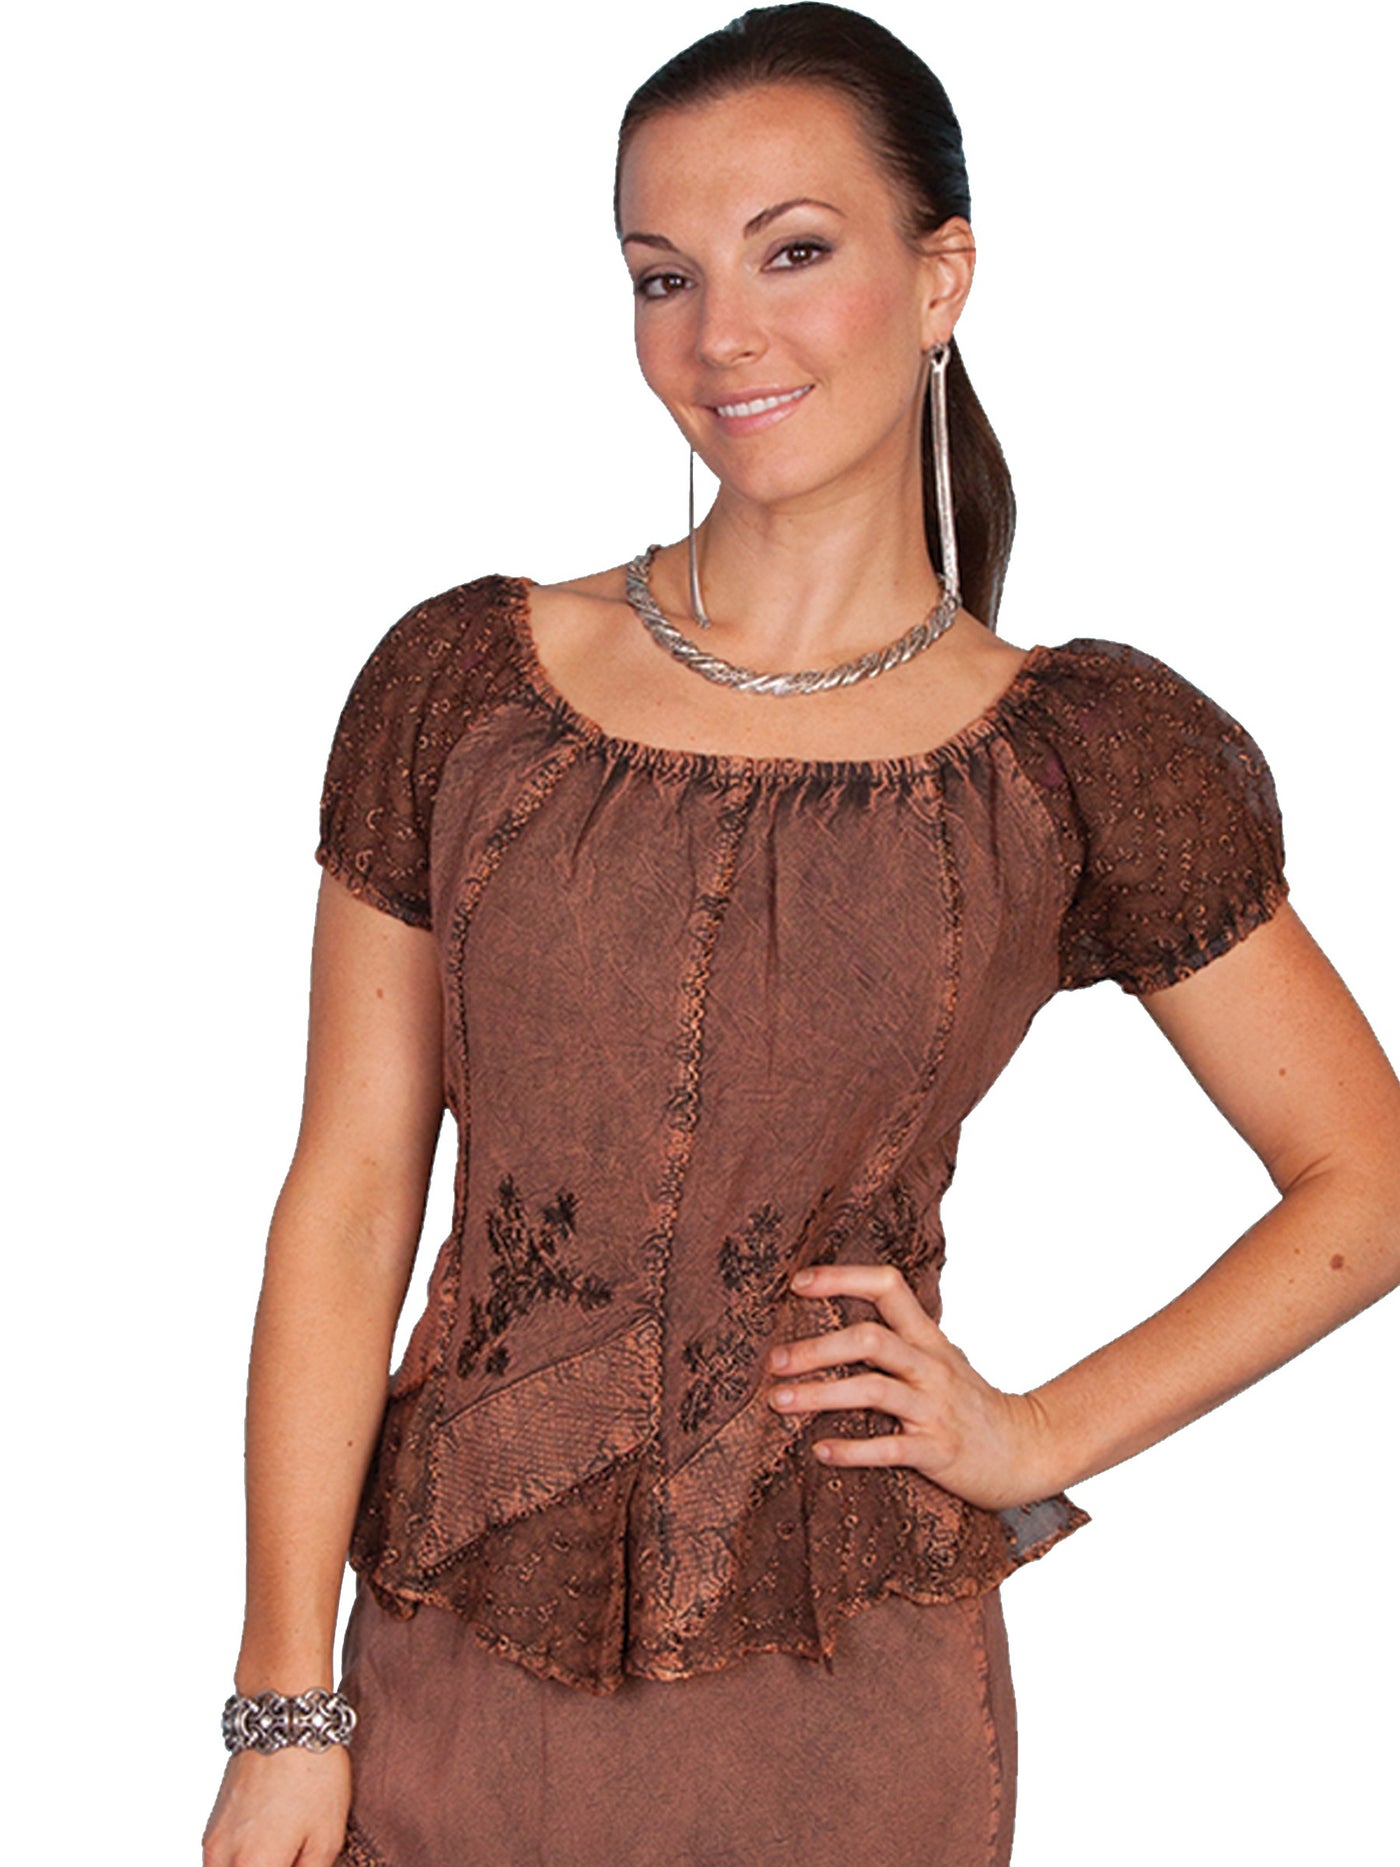 Colorado's Journey Blouse in Copper - SOLD OUT